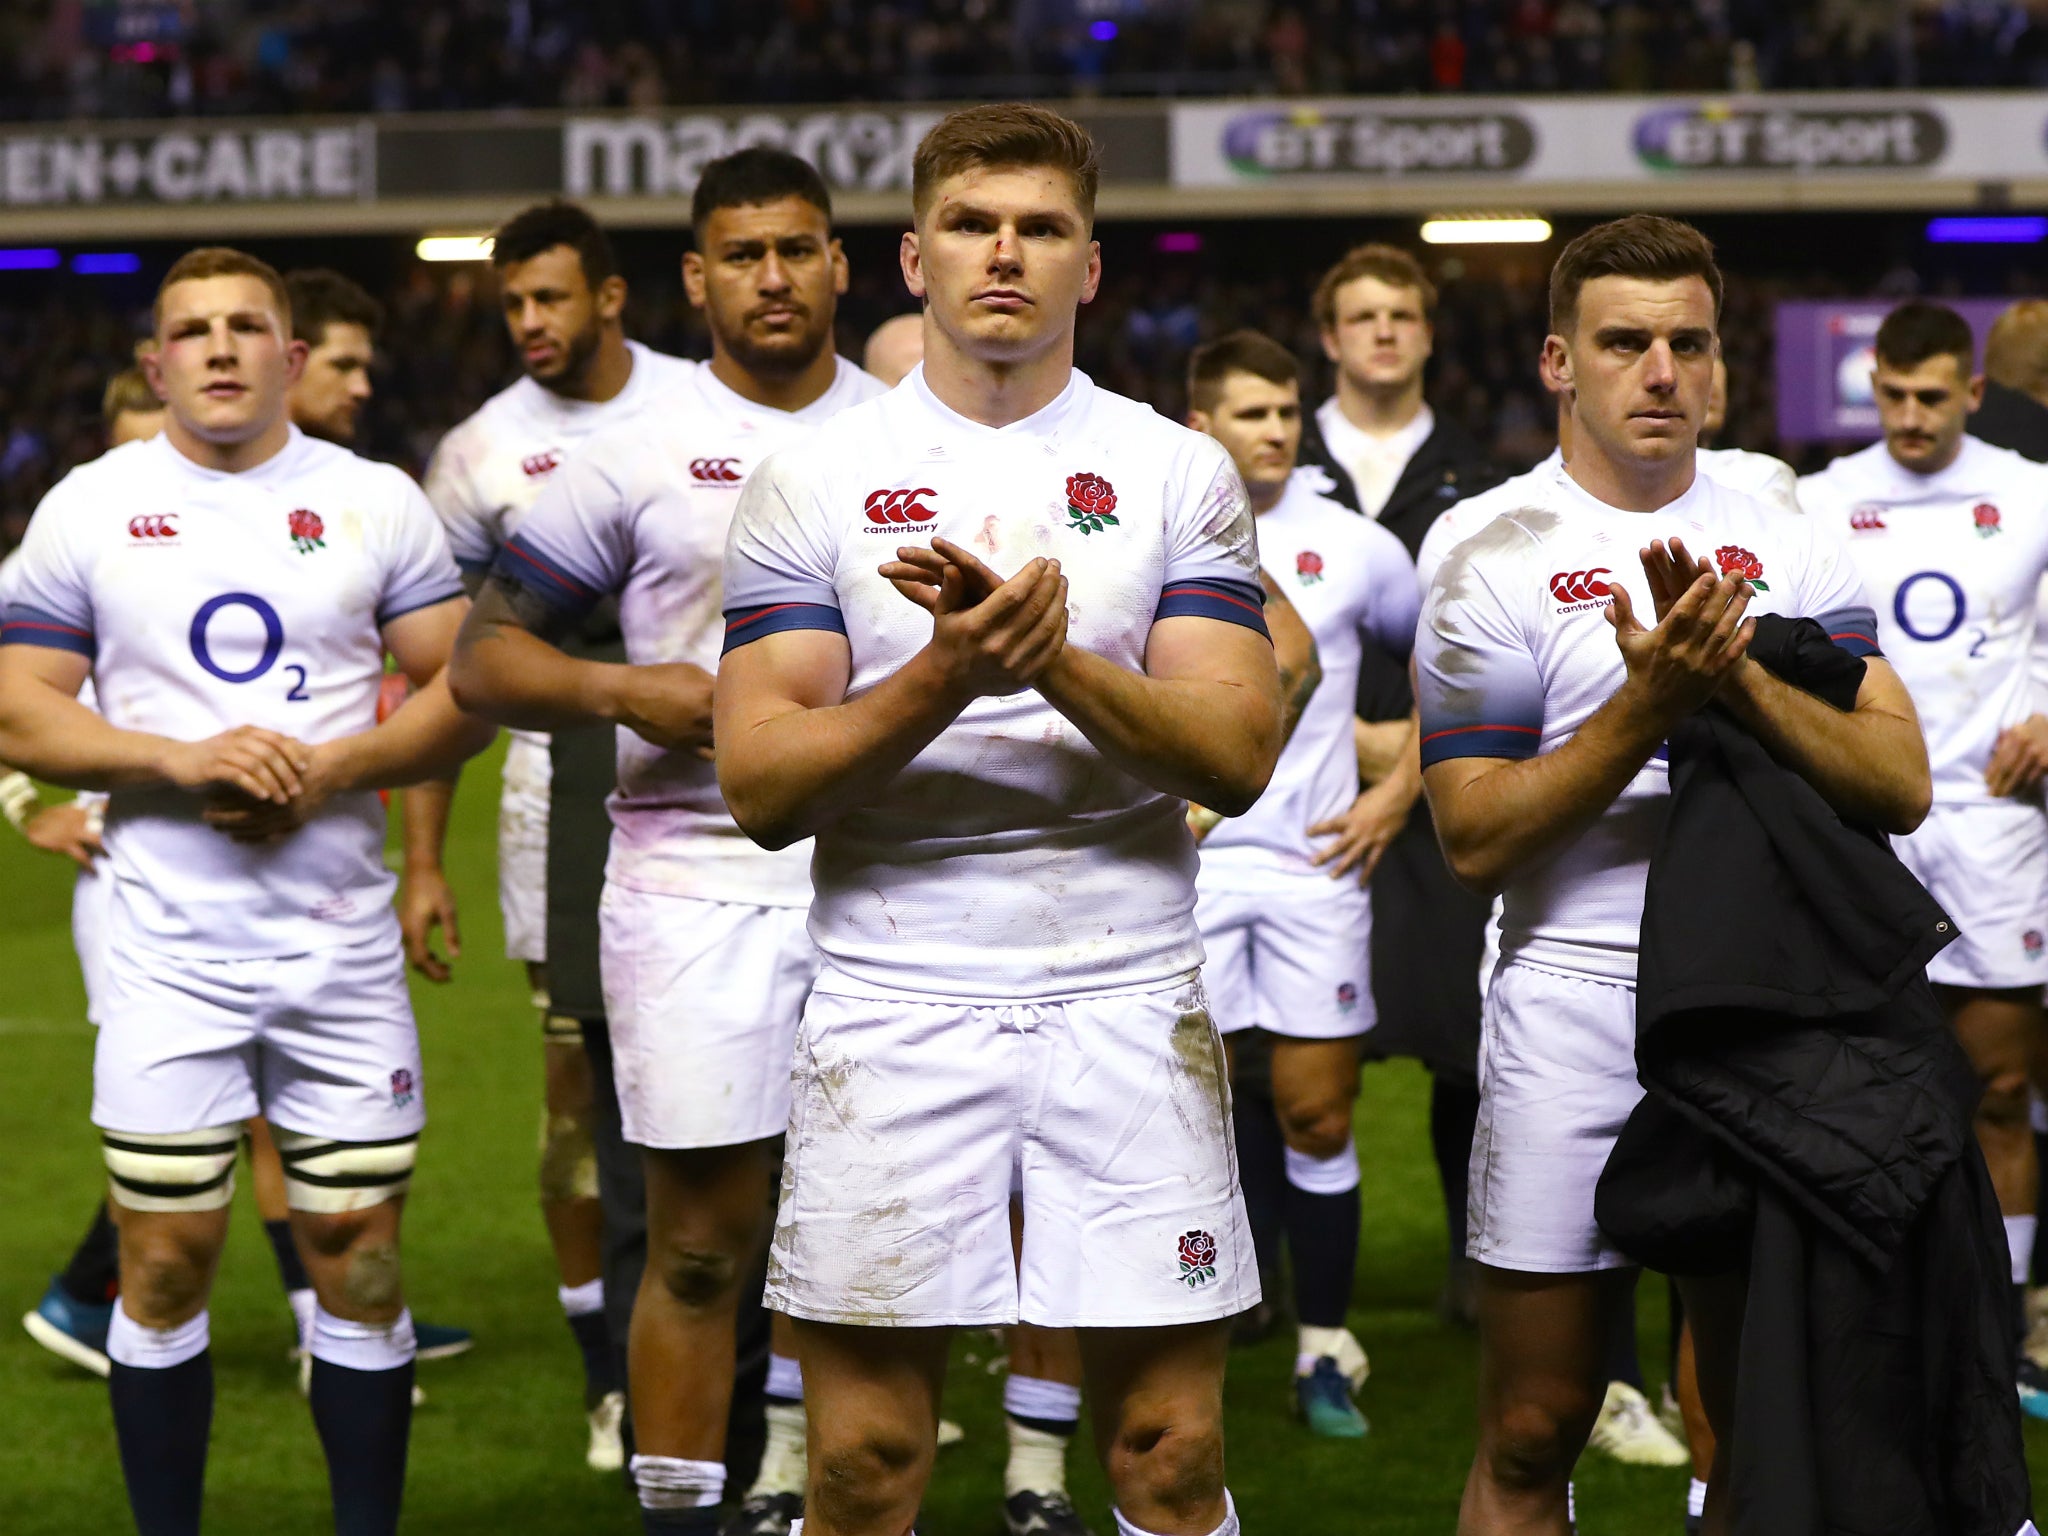 Owen Farrell was reportedly involved in a tunnel bust-up with a number of Scotland players before kick-off